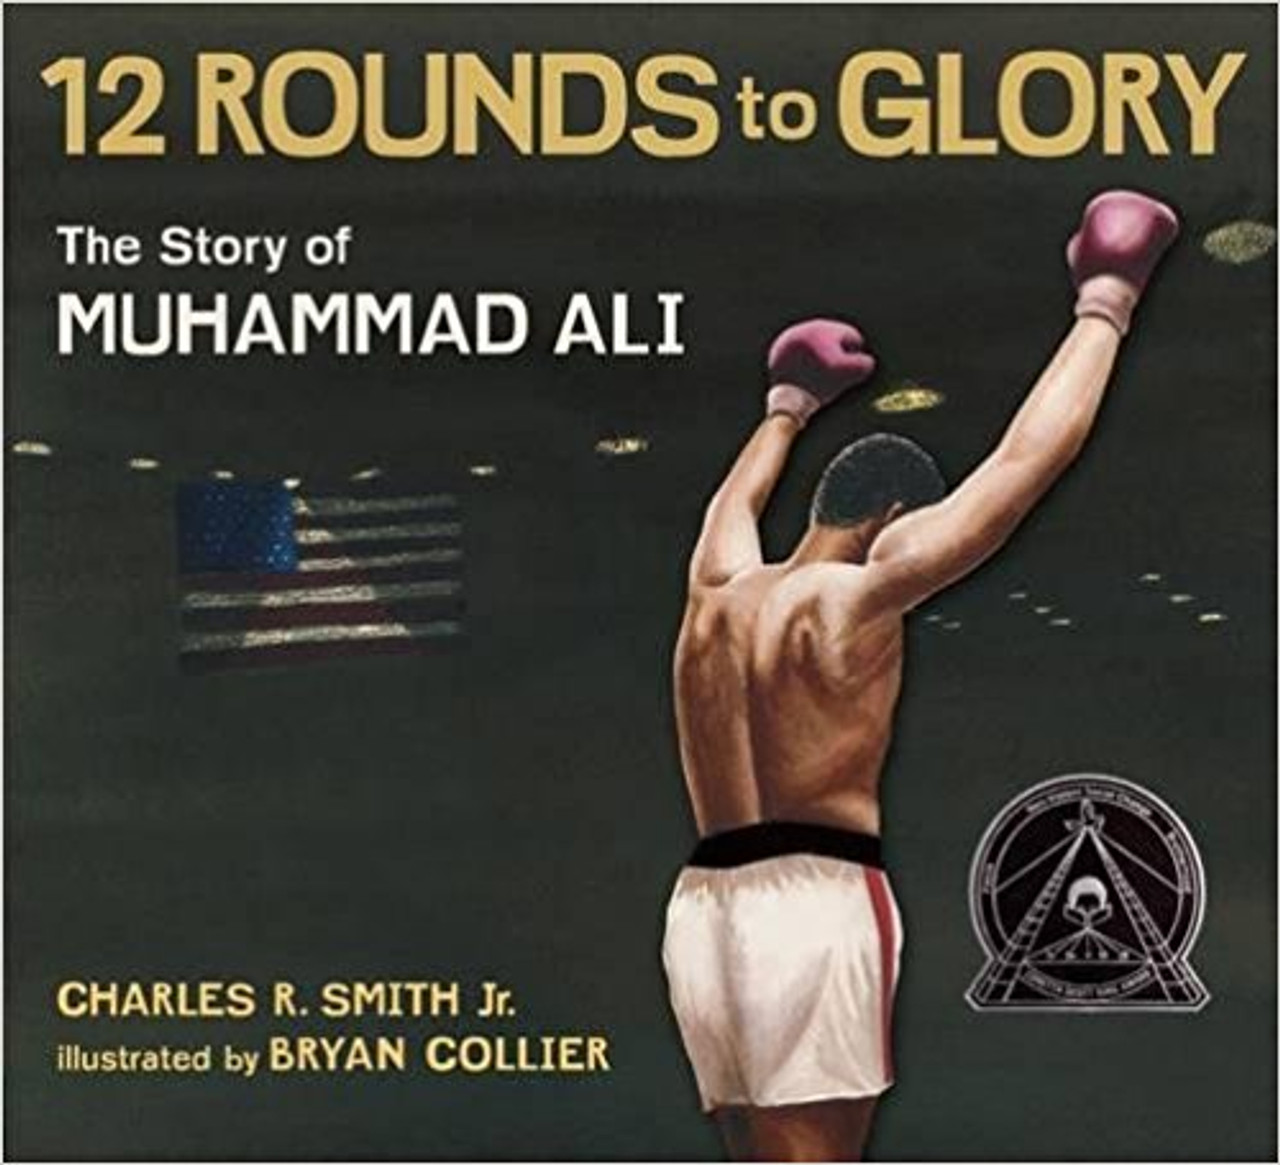 A dynamic author-illustrator team follows the three-time heavyweight champ through 12 rounds of a remarkable life. Rap-inspired verse weaves, bobs, and jabs with relentless energy, capturing the great gift of rhyme of the man who shed the name Cassius Clay to take on the world as Muhammad Ali.